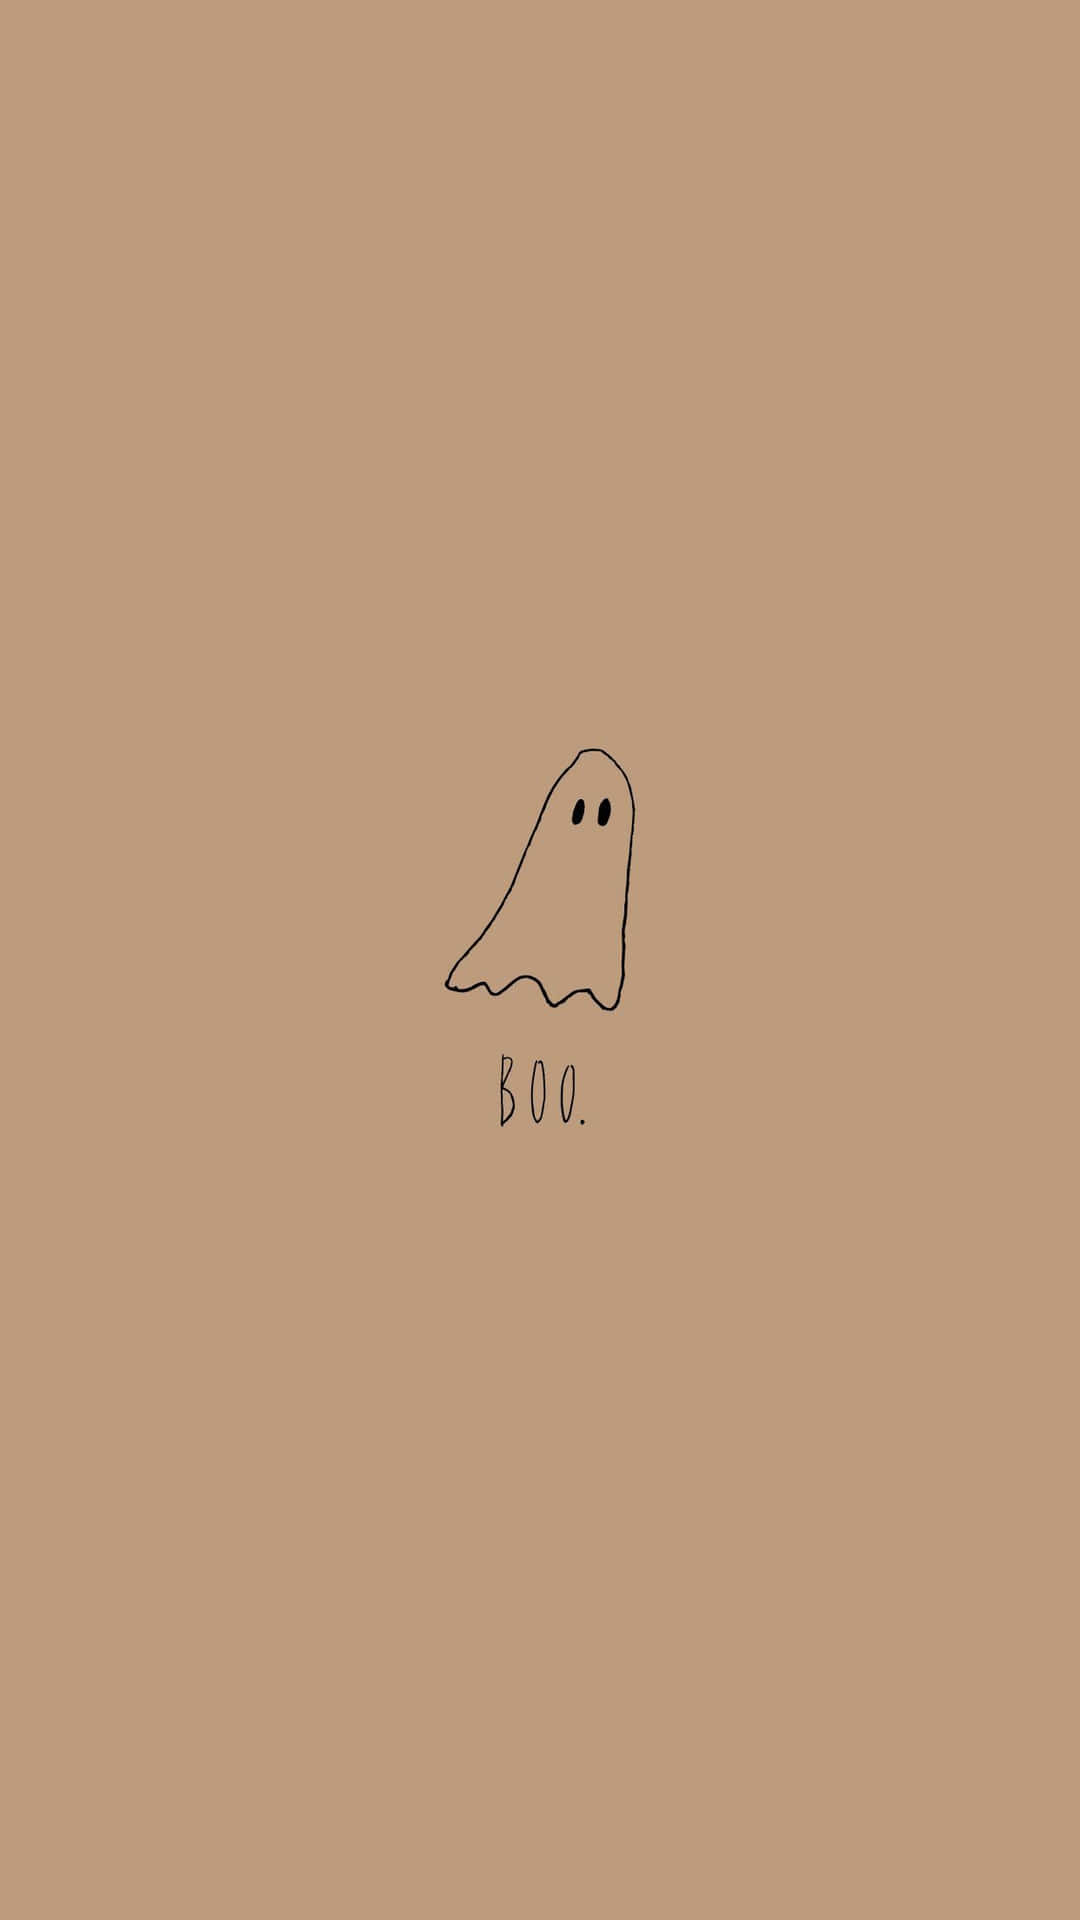 A Ghost On A Beige Background Wallpaper